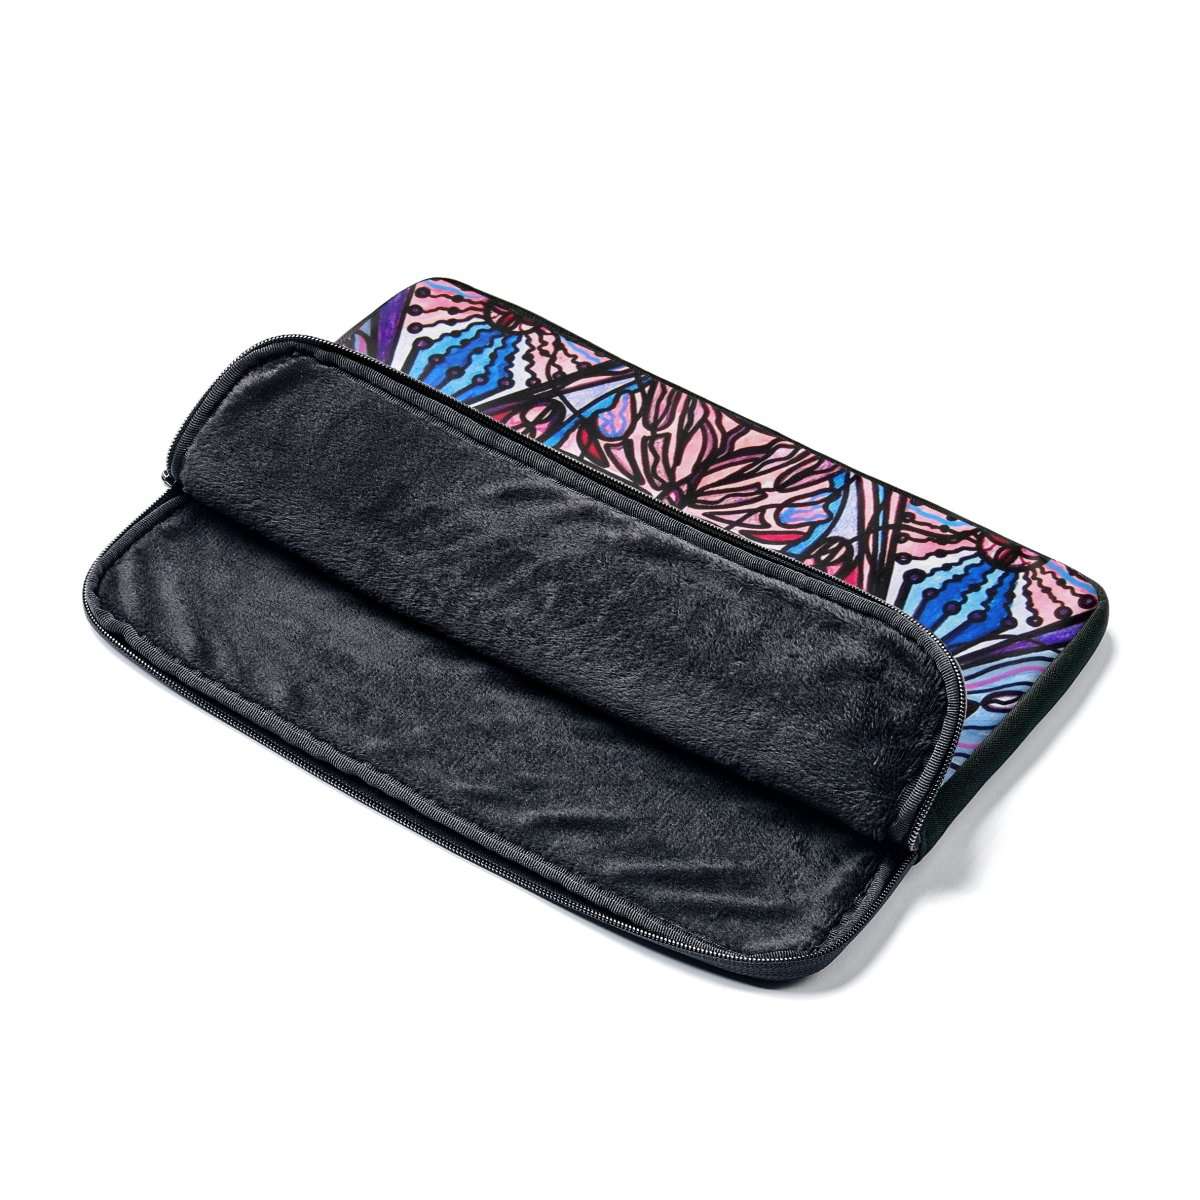 Conceive - Laptop Sleeve